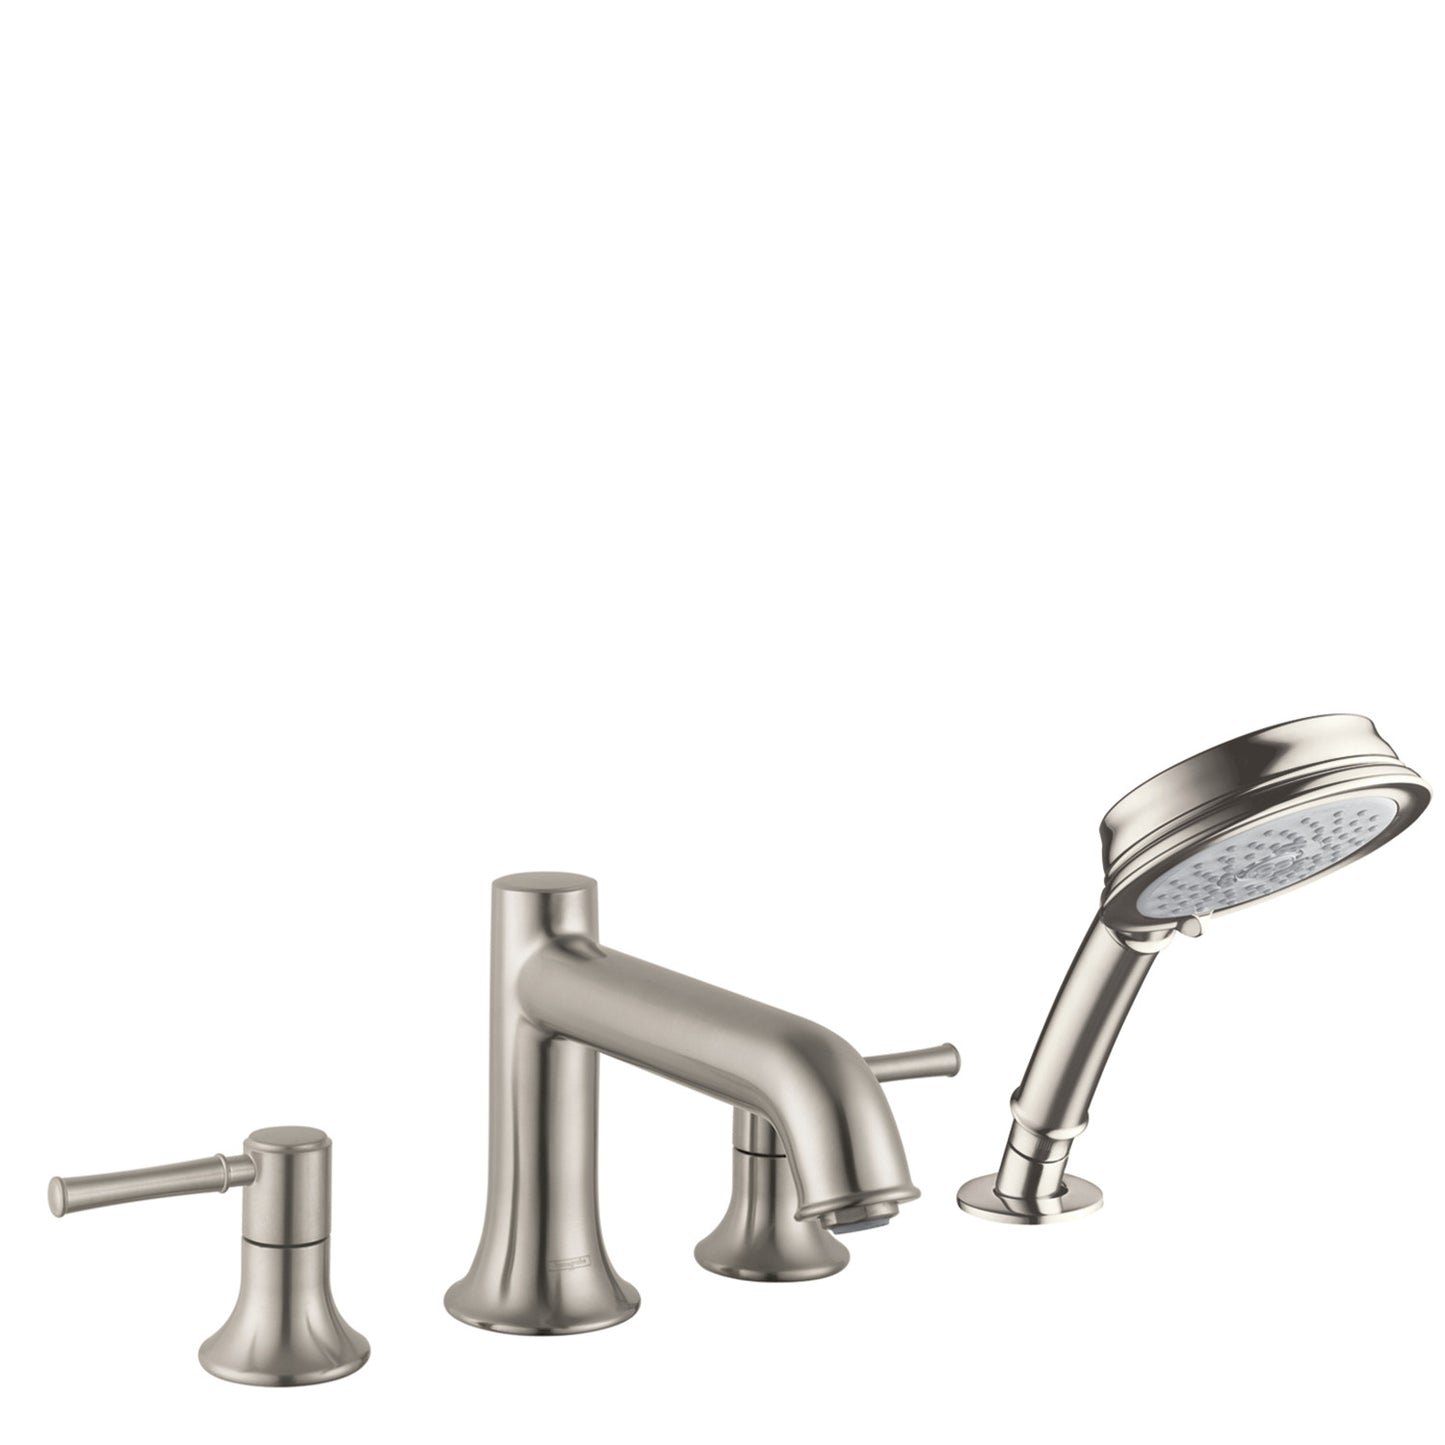 HANSGROHE 14315821 Brushed Nickel Talis C Classic Tub Filler 1.8 GPM